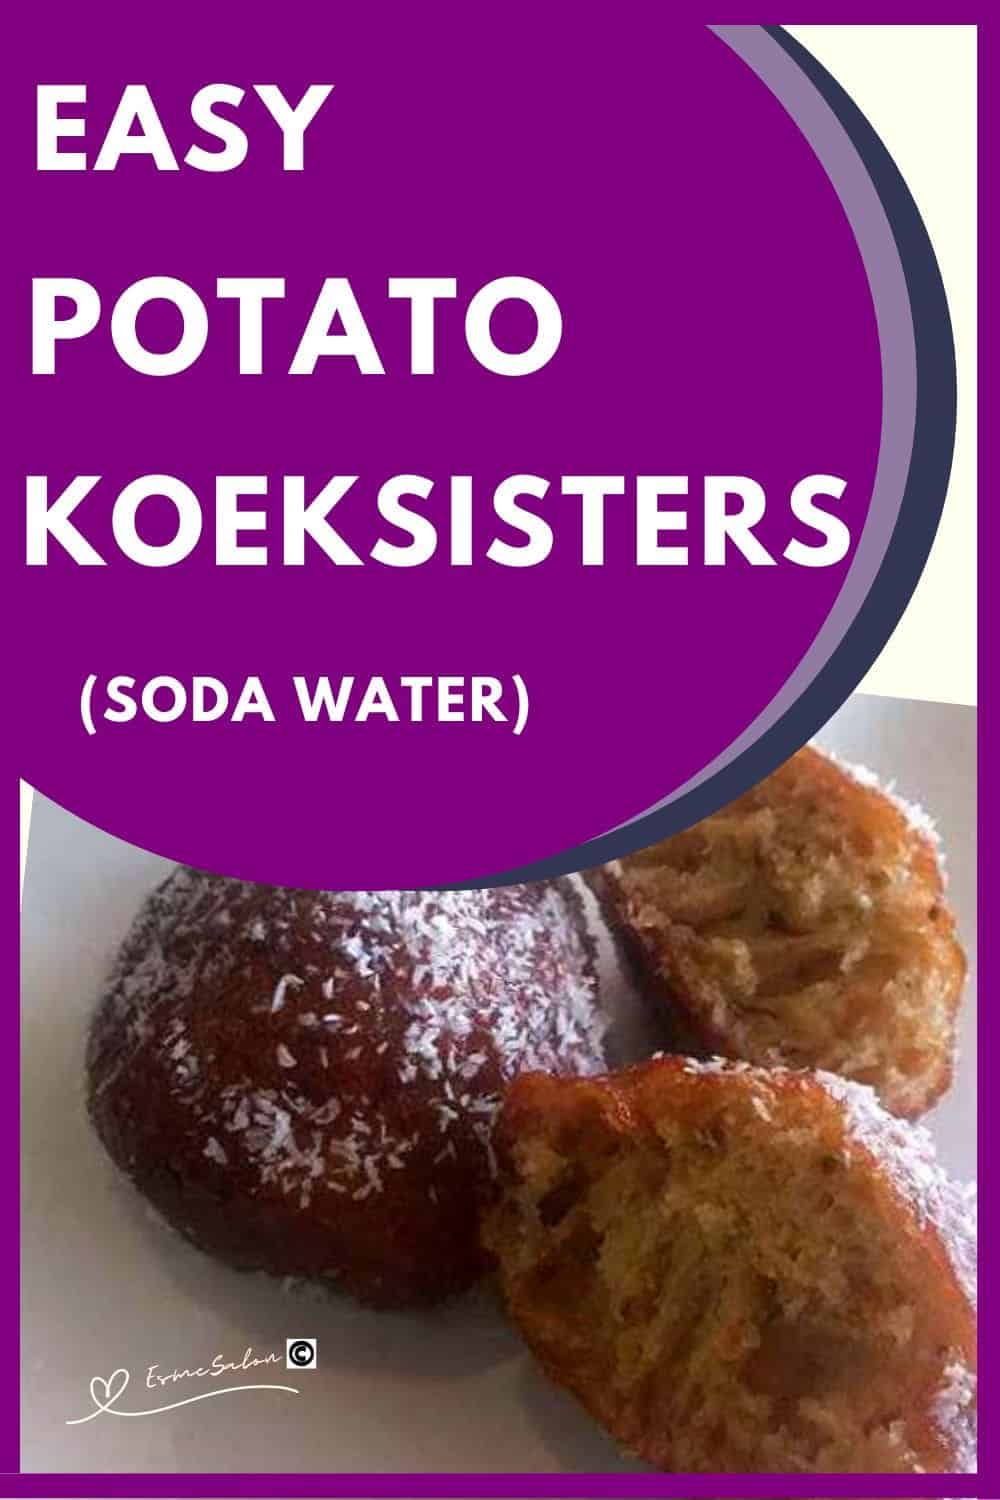 an image of Potato Koeksister prepared with Soda Water which makes it super light and fluffy